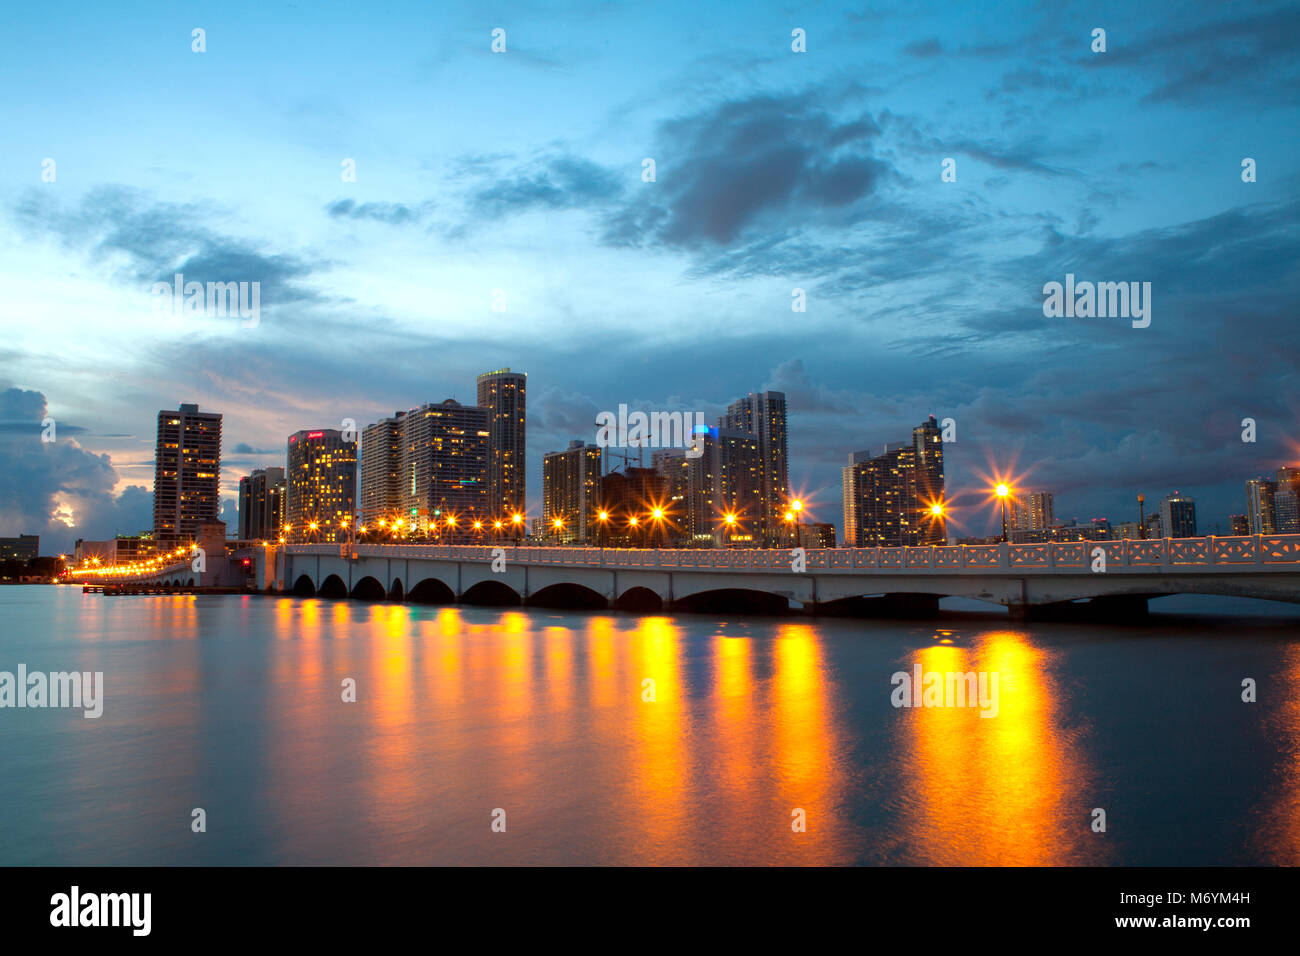 View from Biscane Island on Downtown in Miami over a bridge. Lamps reflecting on calm water. Stock Photo